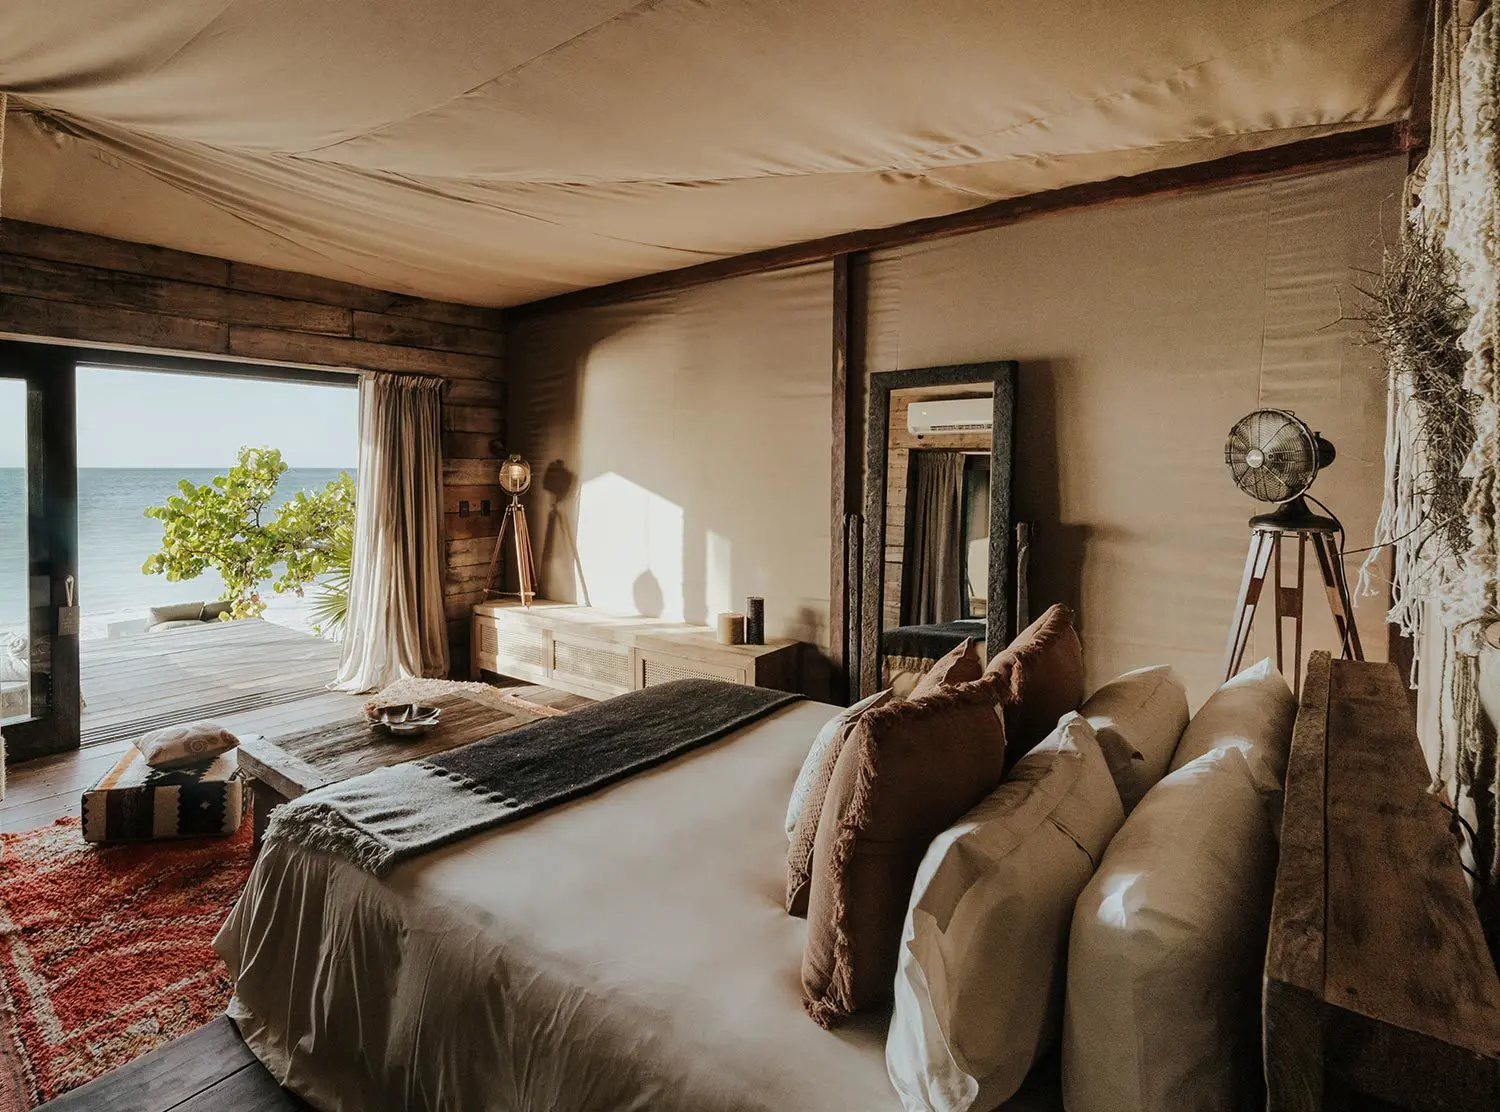 Nômade Holbox The beautiful bedroom filled with sunlight and natural materials